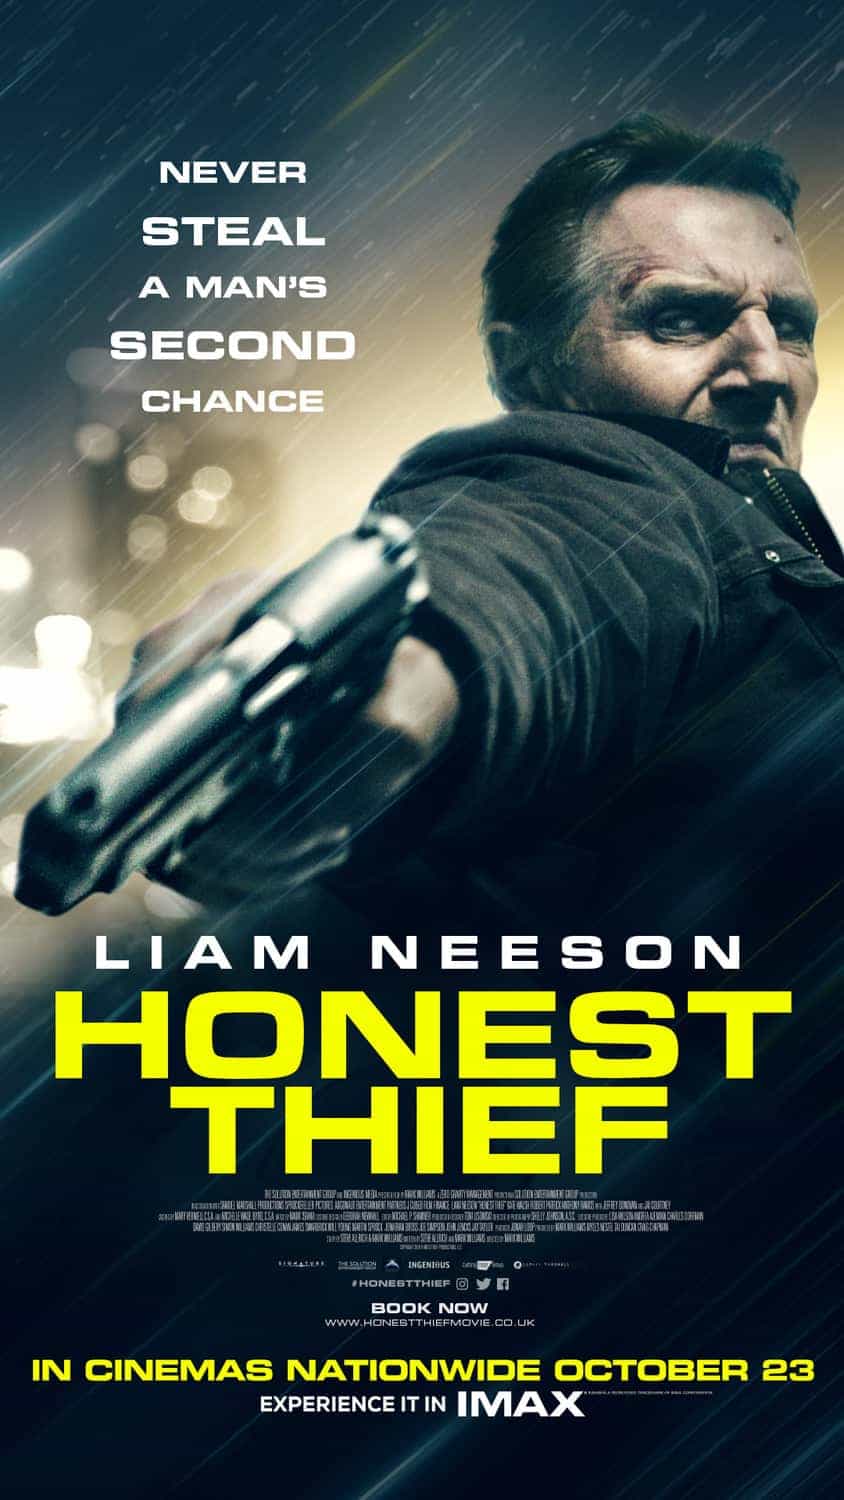 US Box Office Weekend Report 16th - 18th October 2020:  Liam Neeson returns to the action genre in Honest Thief which debuts at number 1